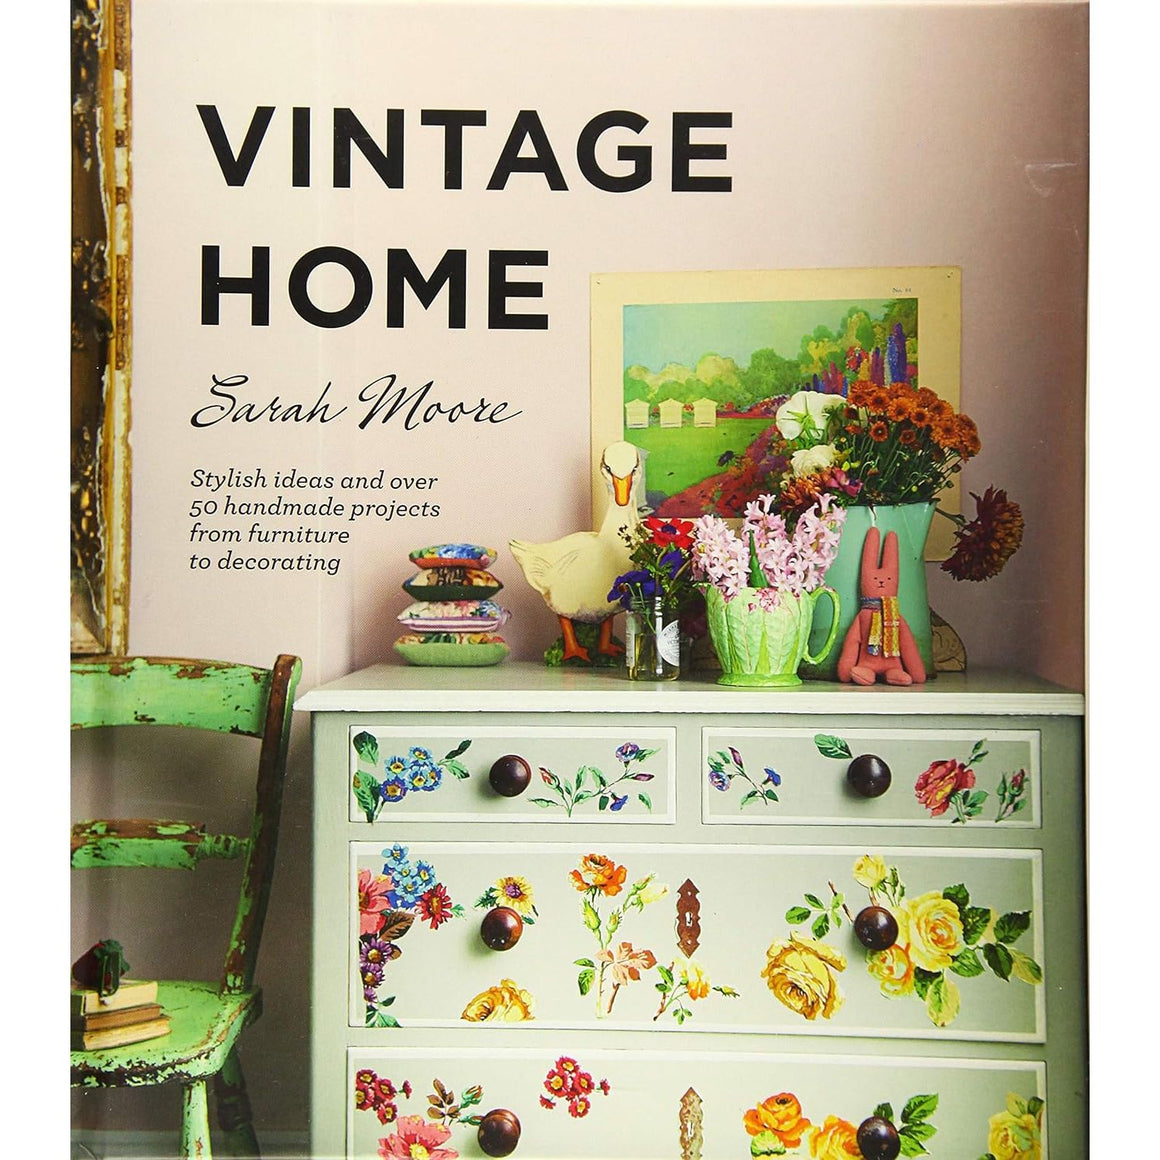 Vintage Home: Stylish ideas and Over 50 Handmade Projects from Furniture to Decorating